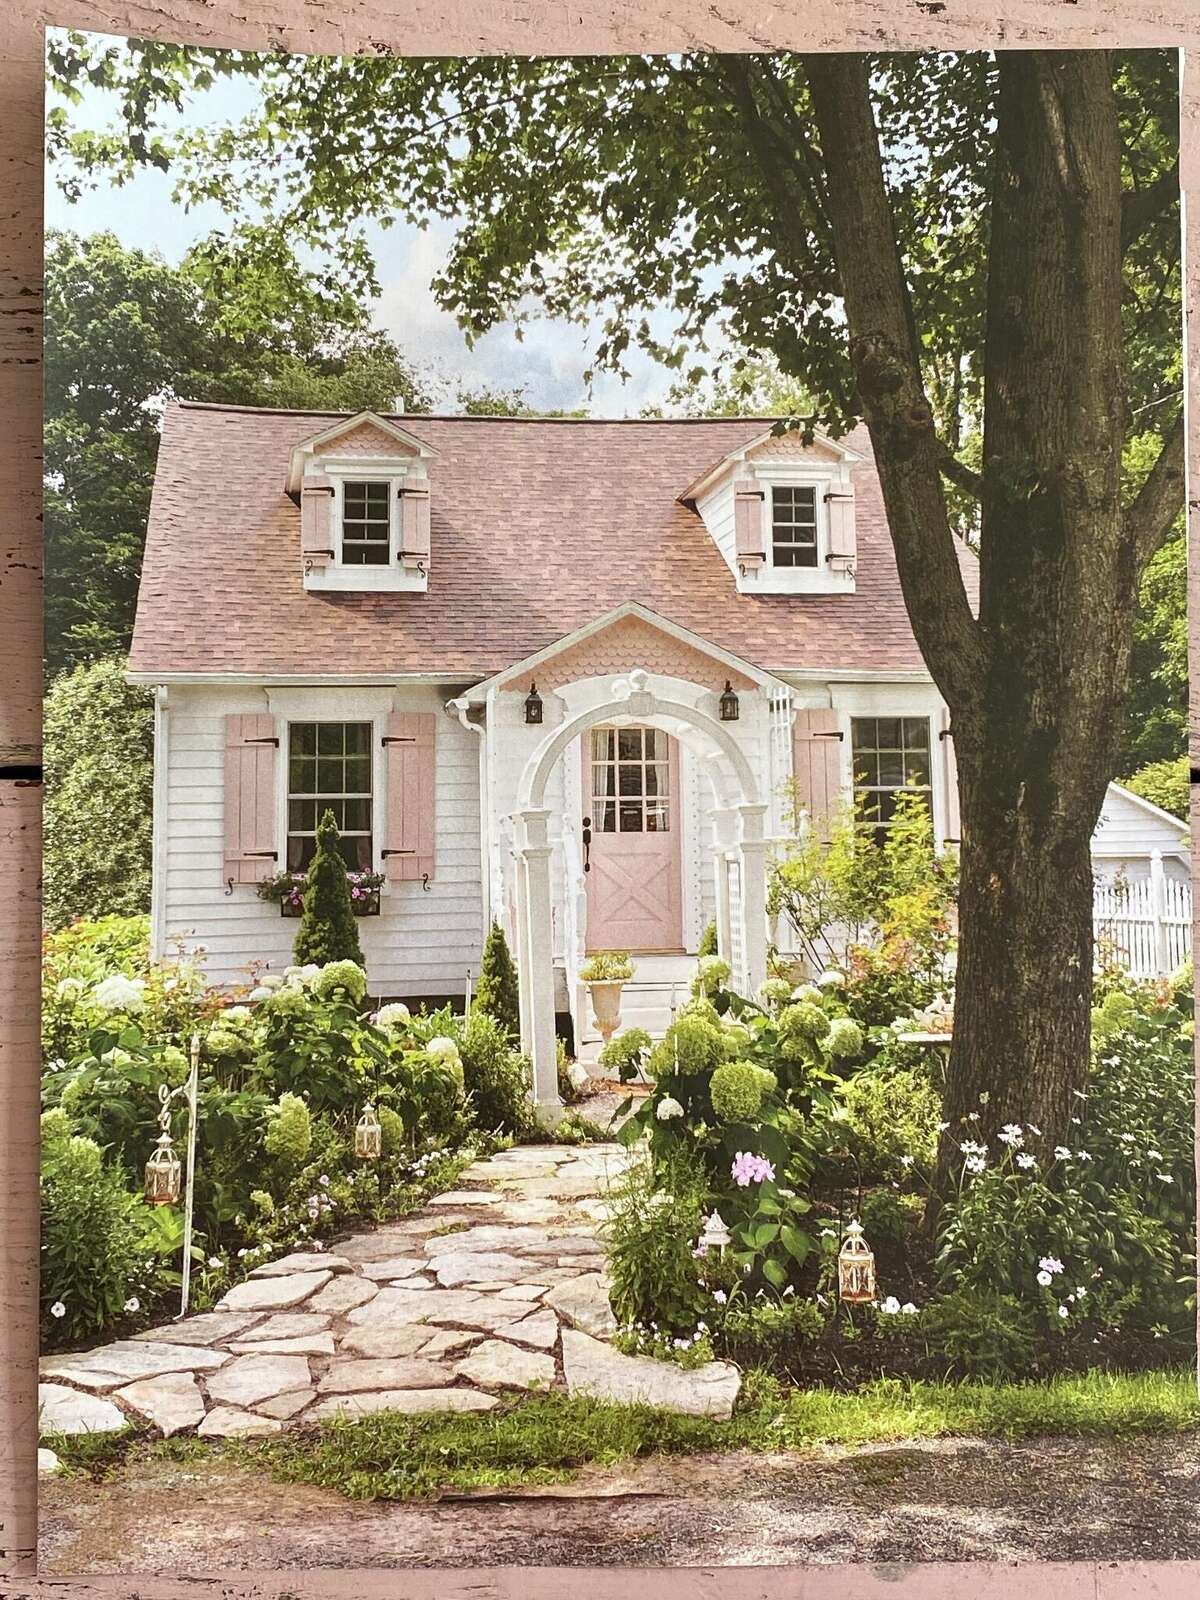 Glenmont home featured on cover of Country Home magazine